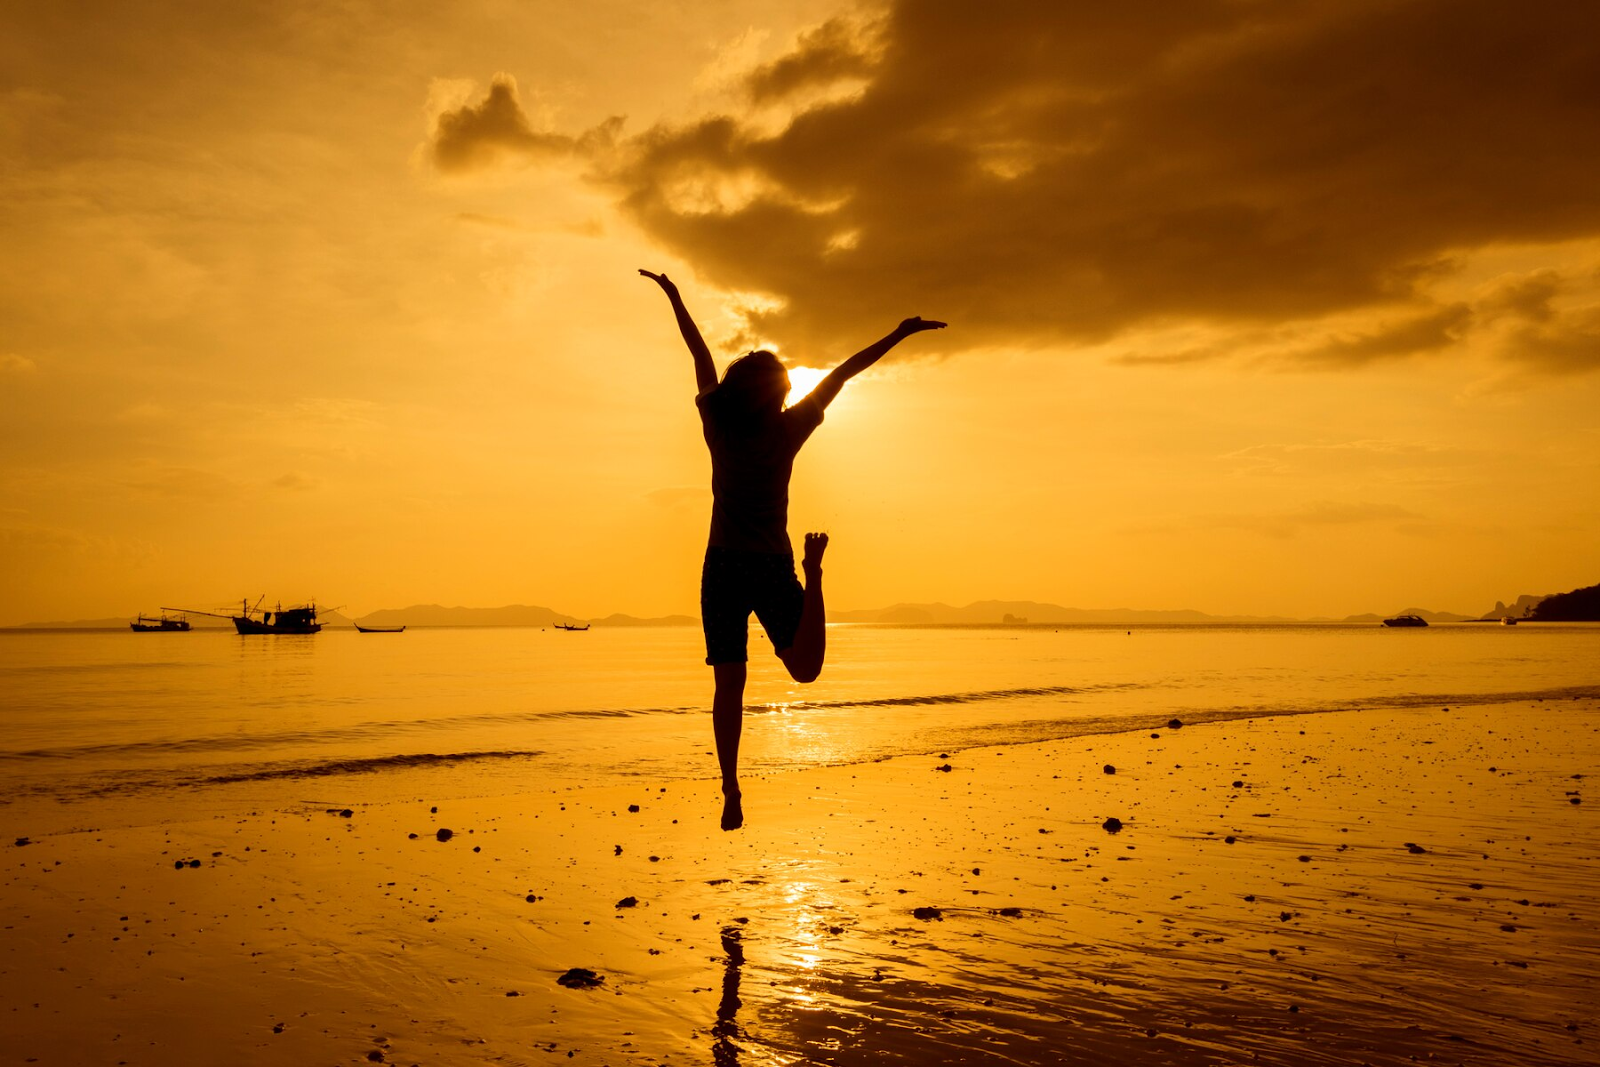 A woman jumping on the beach at sunset.